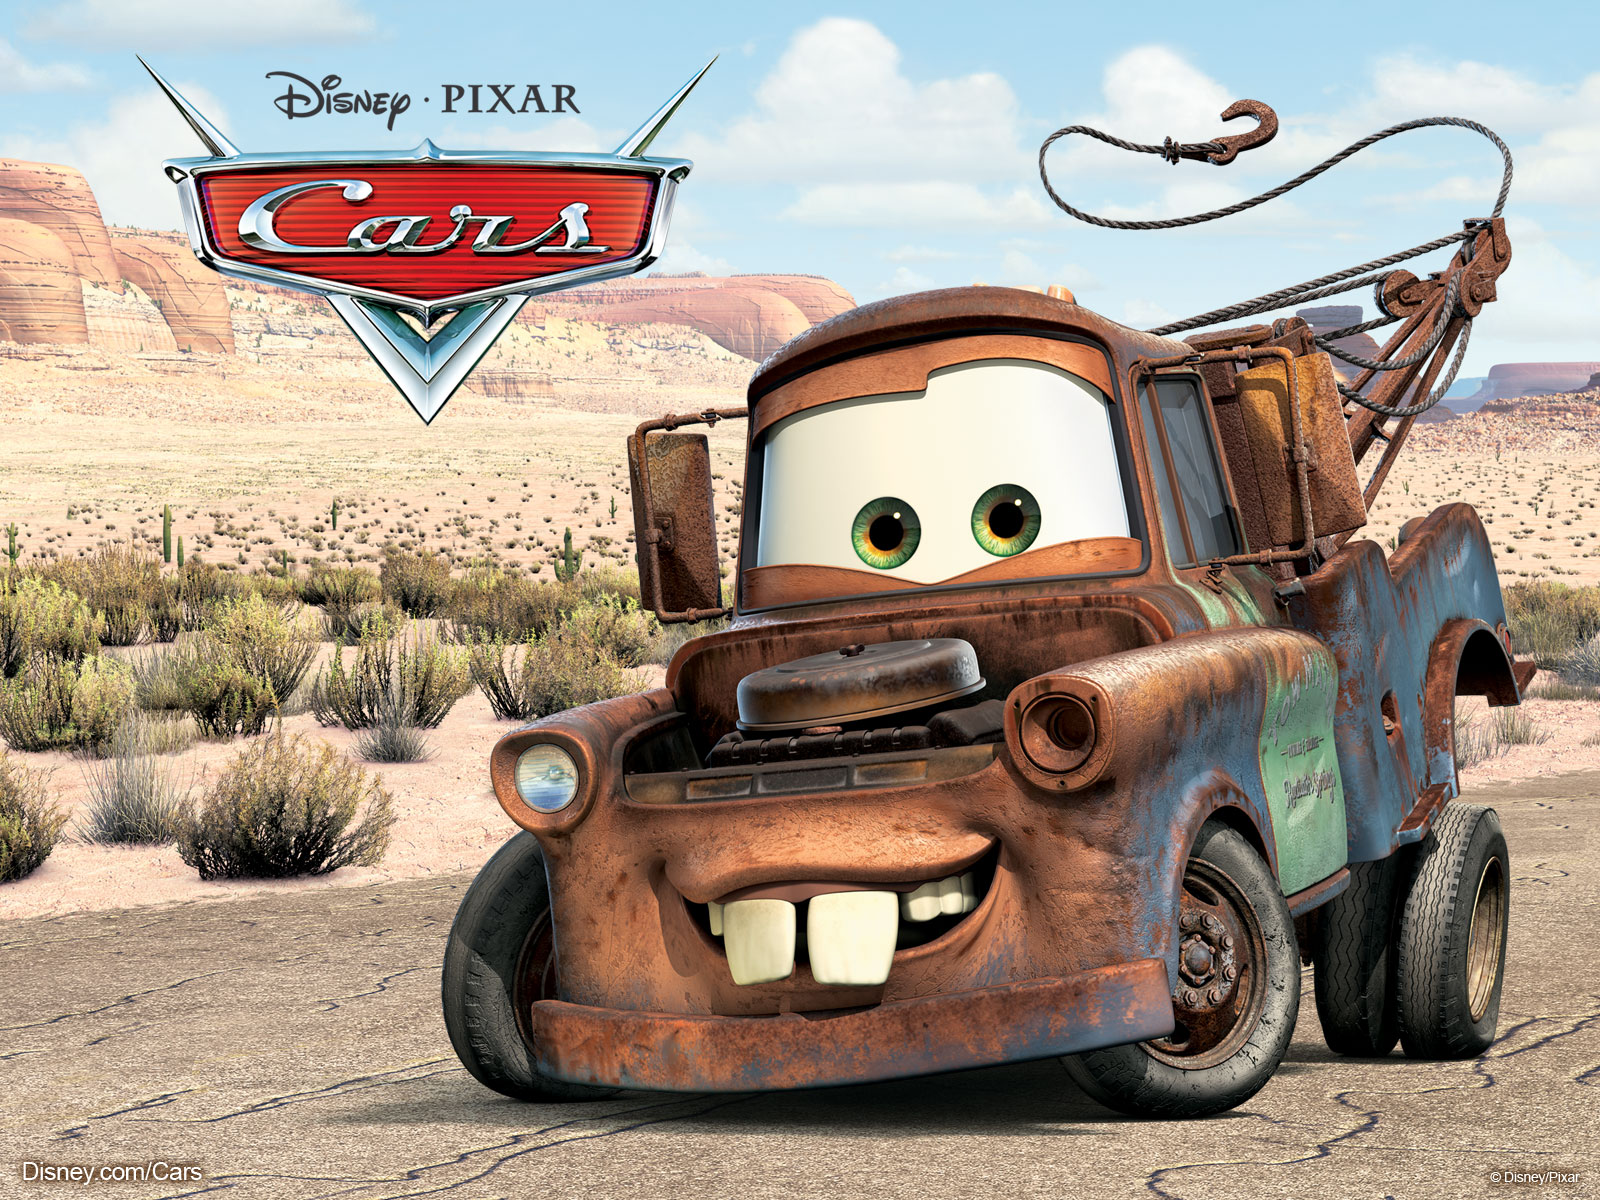 Mater the Tow Truck from Pixar’s Cars Movie Wallpaper.